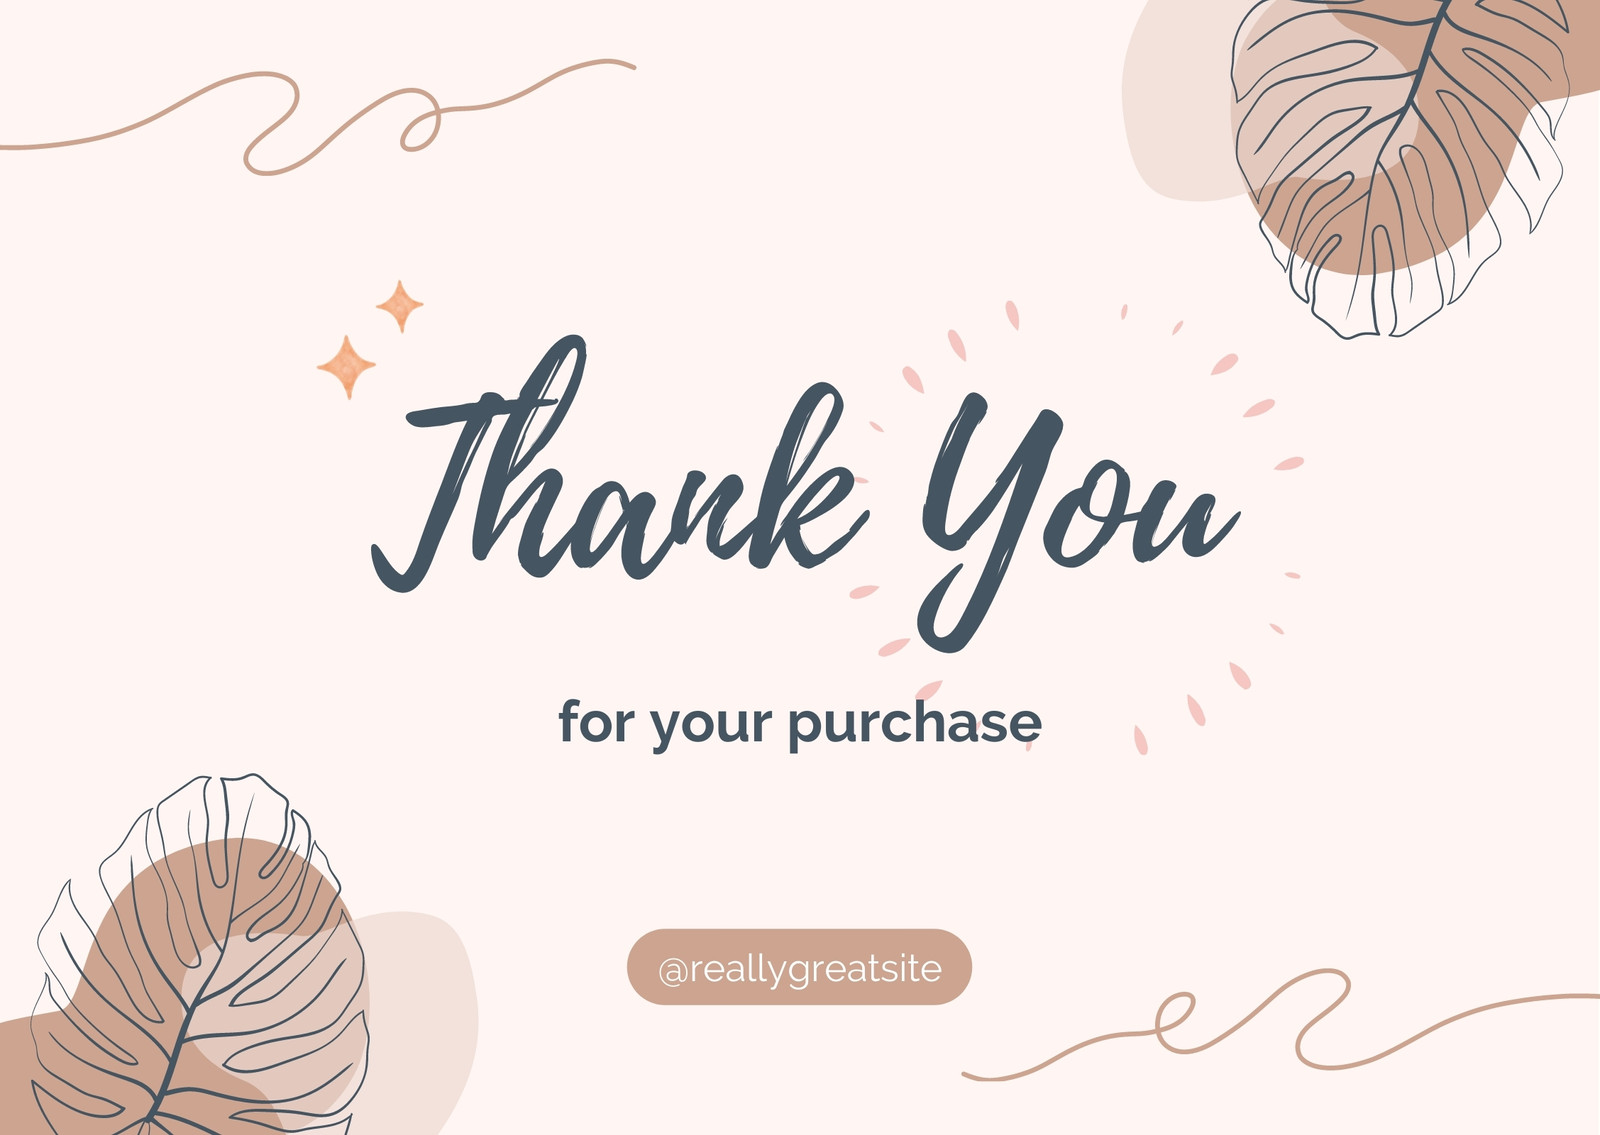 Purple thank you business cards thank you cards business template,\u00a0editable and printable thank you cards thank you for your purchase